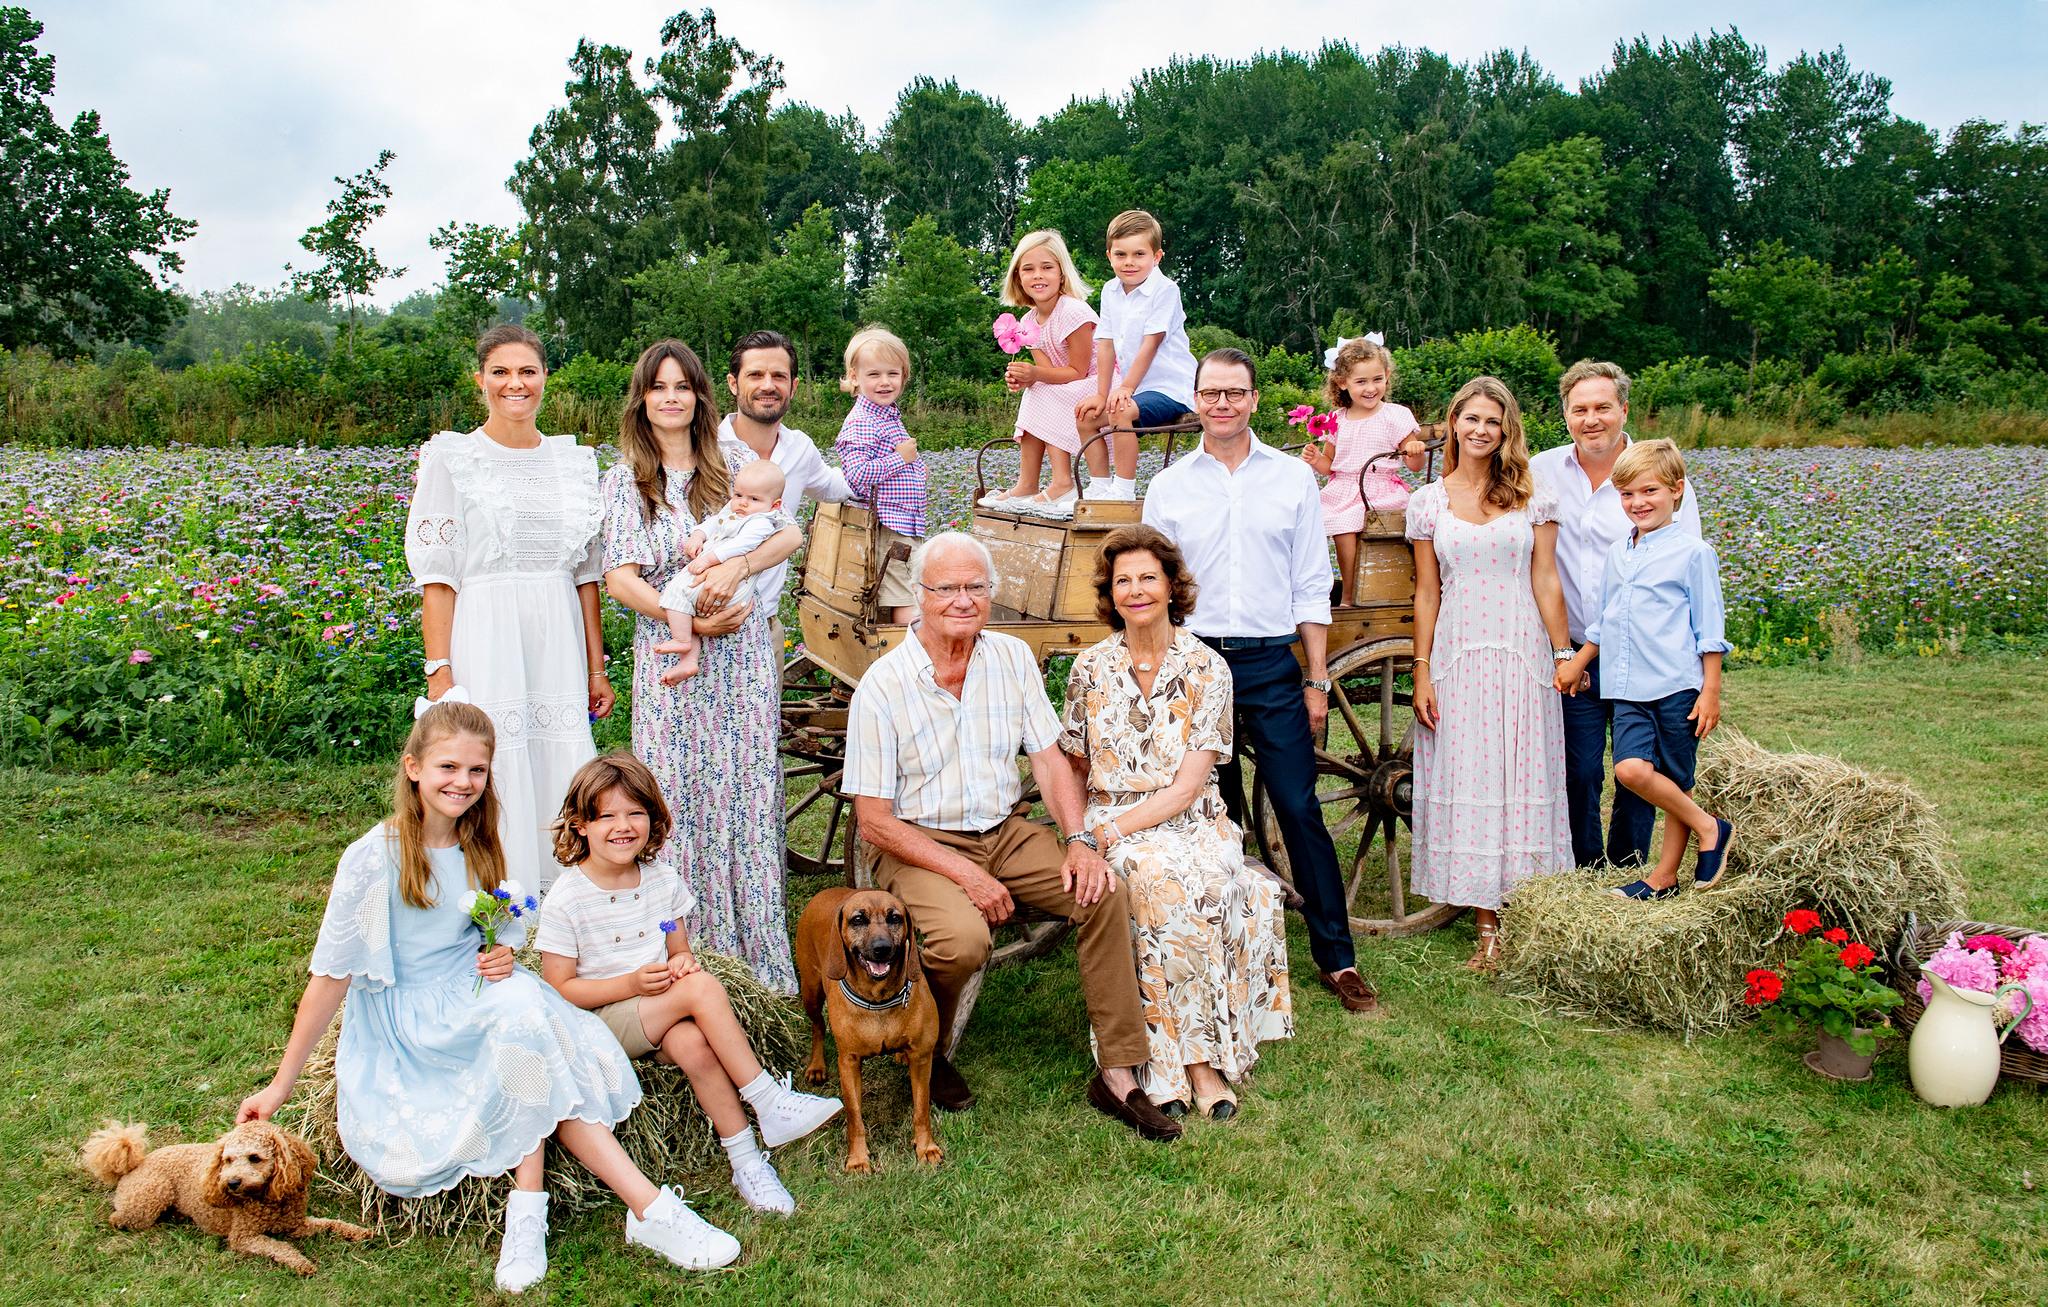 A group portrait of the members of the Swedish royal family, grown-ups and children. The photo os taken on a green lawn, with trees in the background.